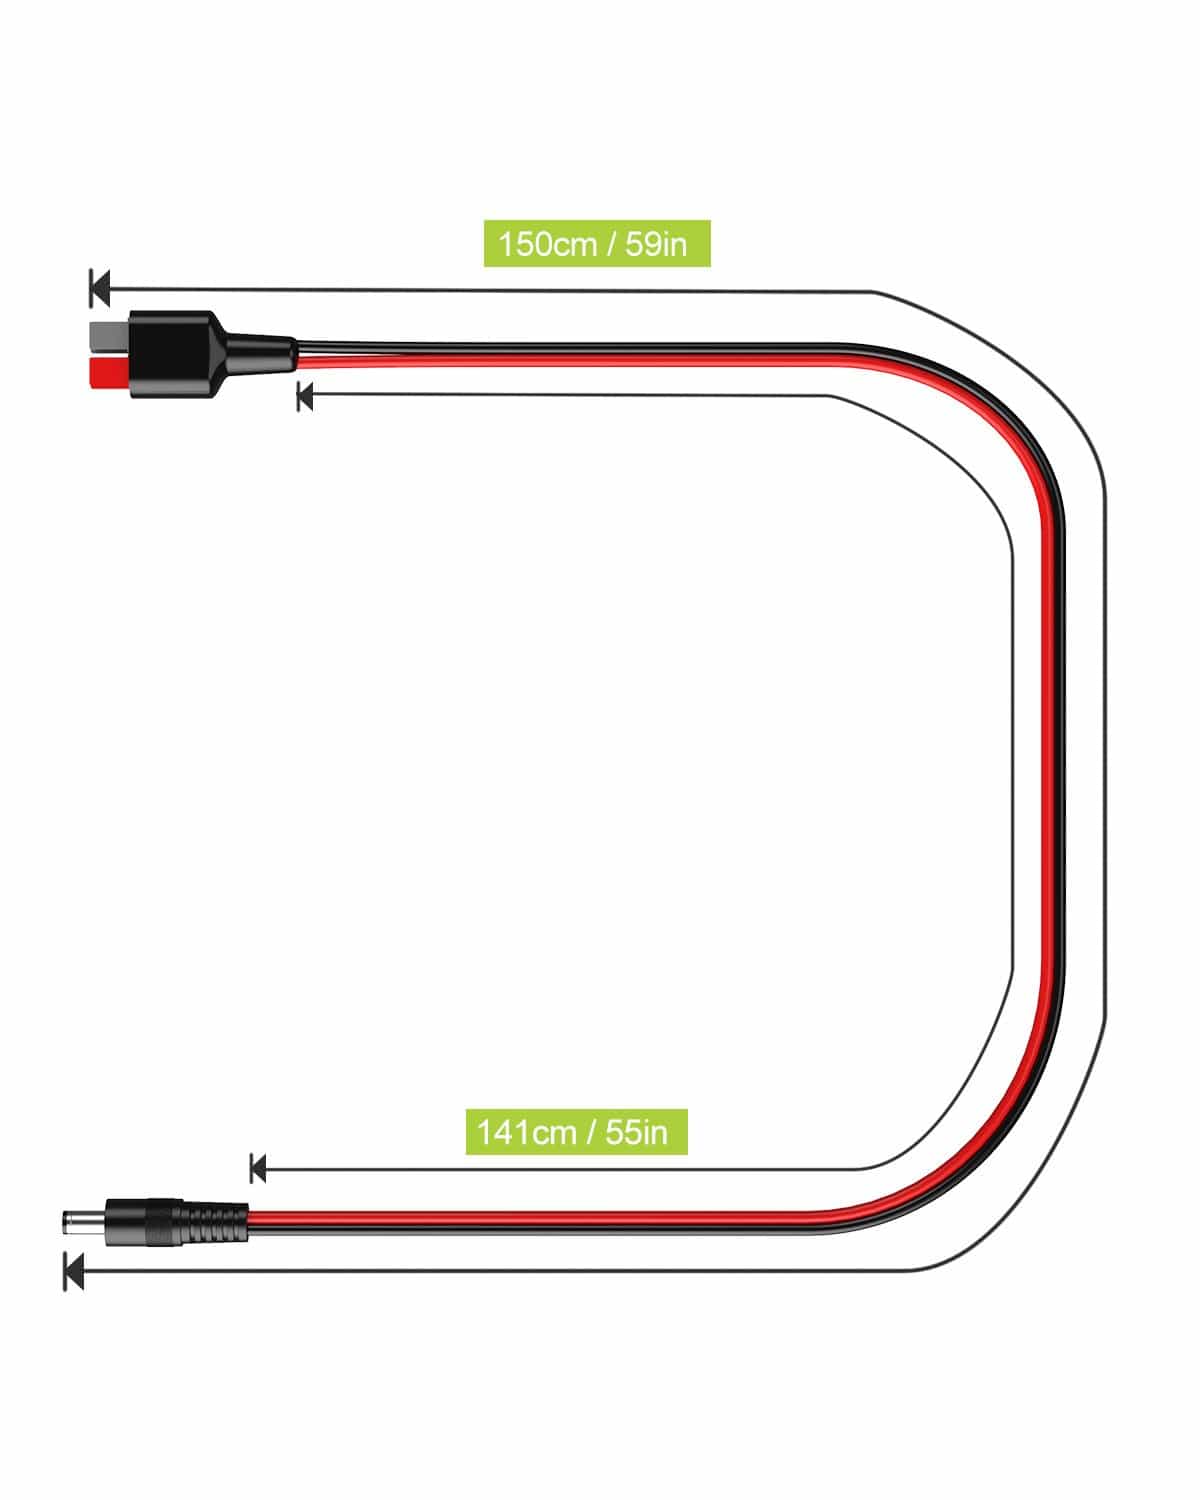 Anderson Connectors - Quick Guide - What Cable Size?